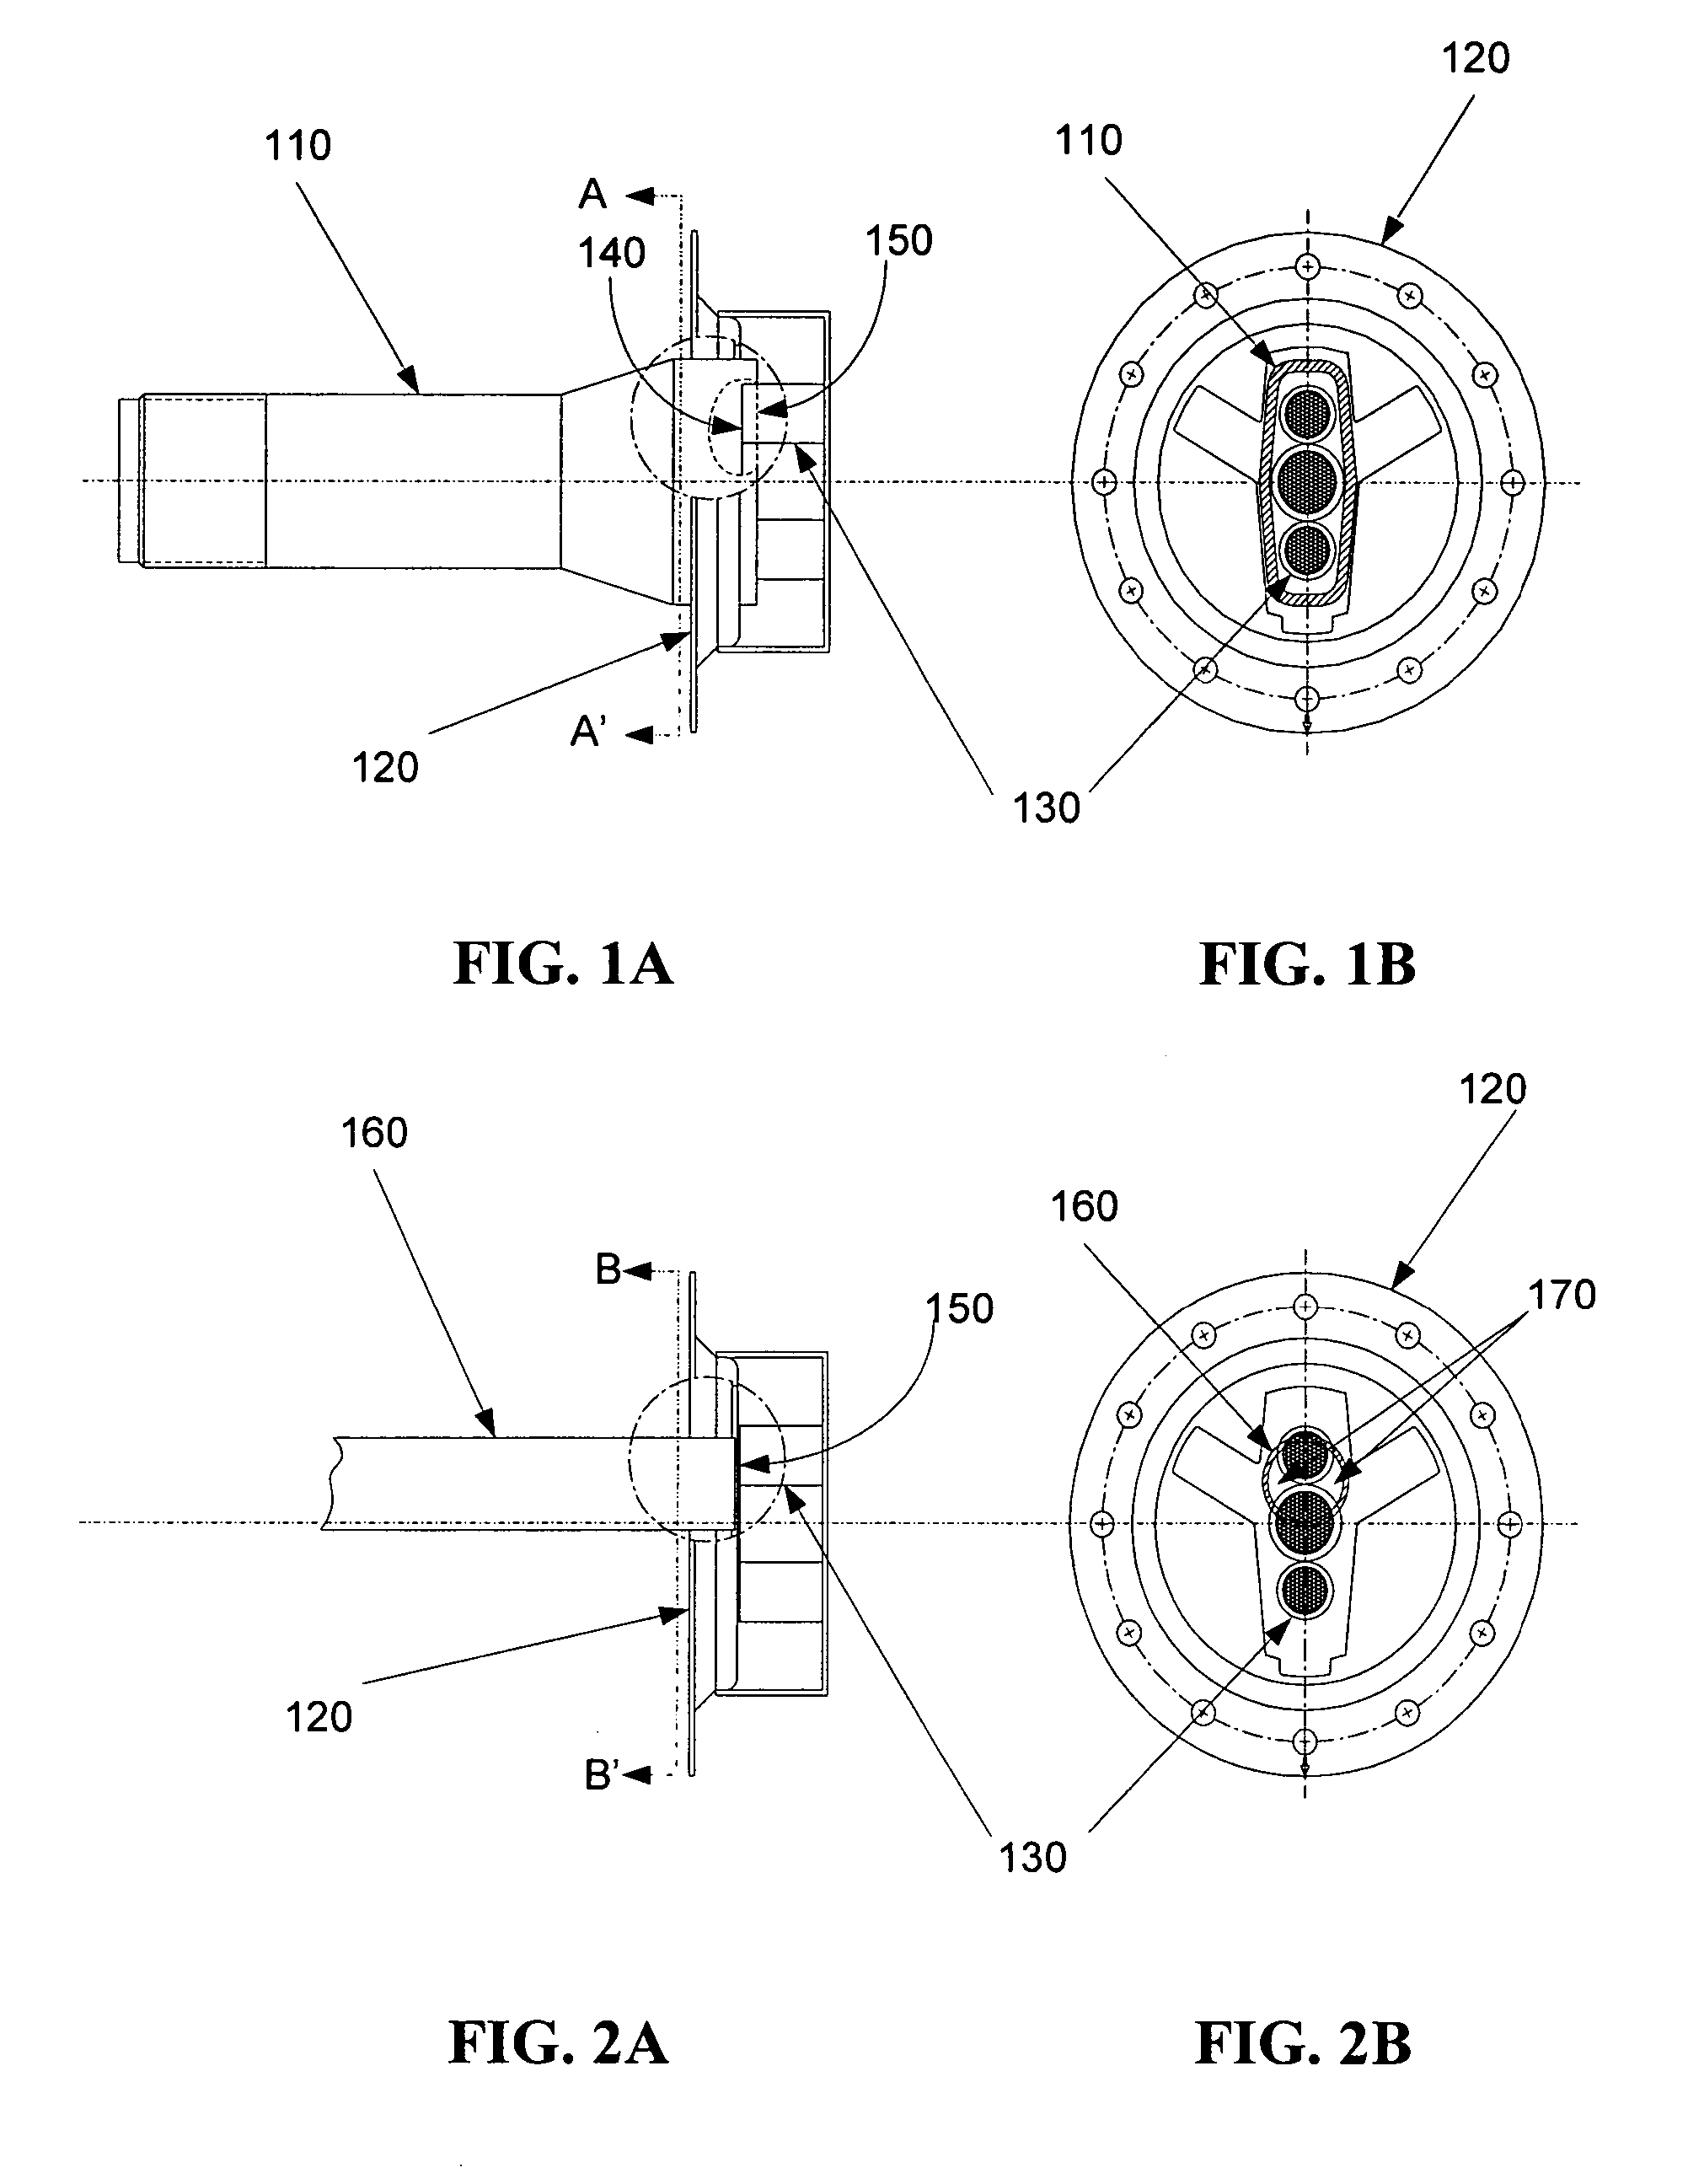 System and method for preventing incorrect aircraft fuel usage